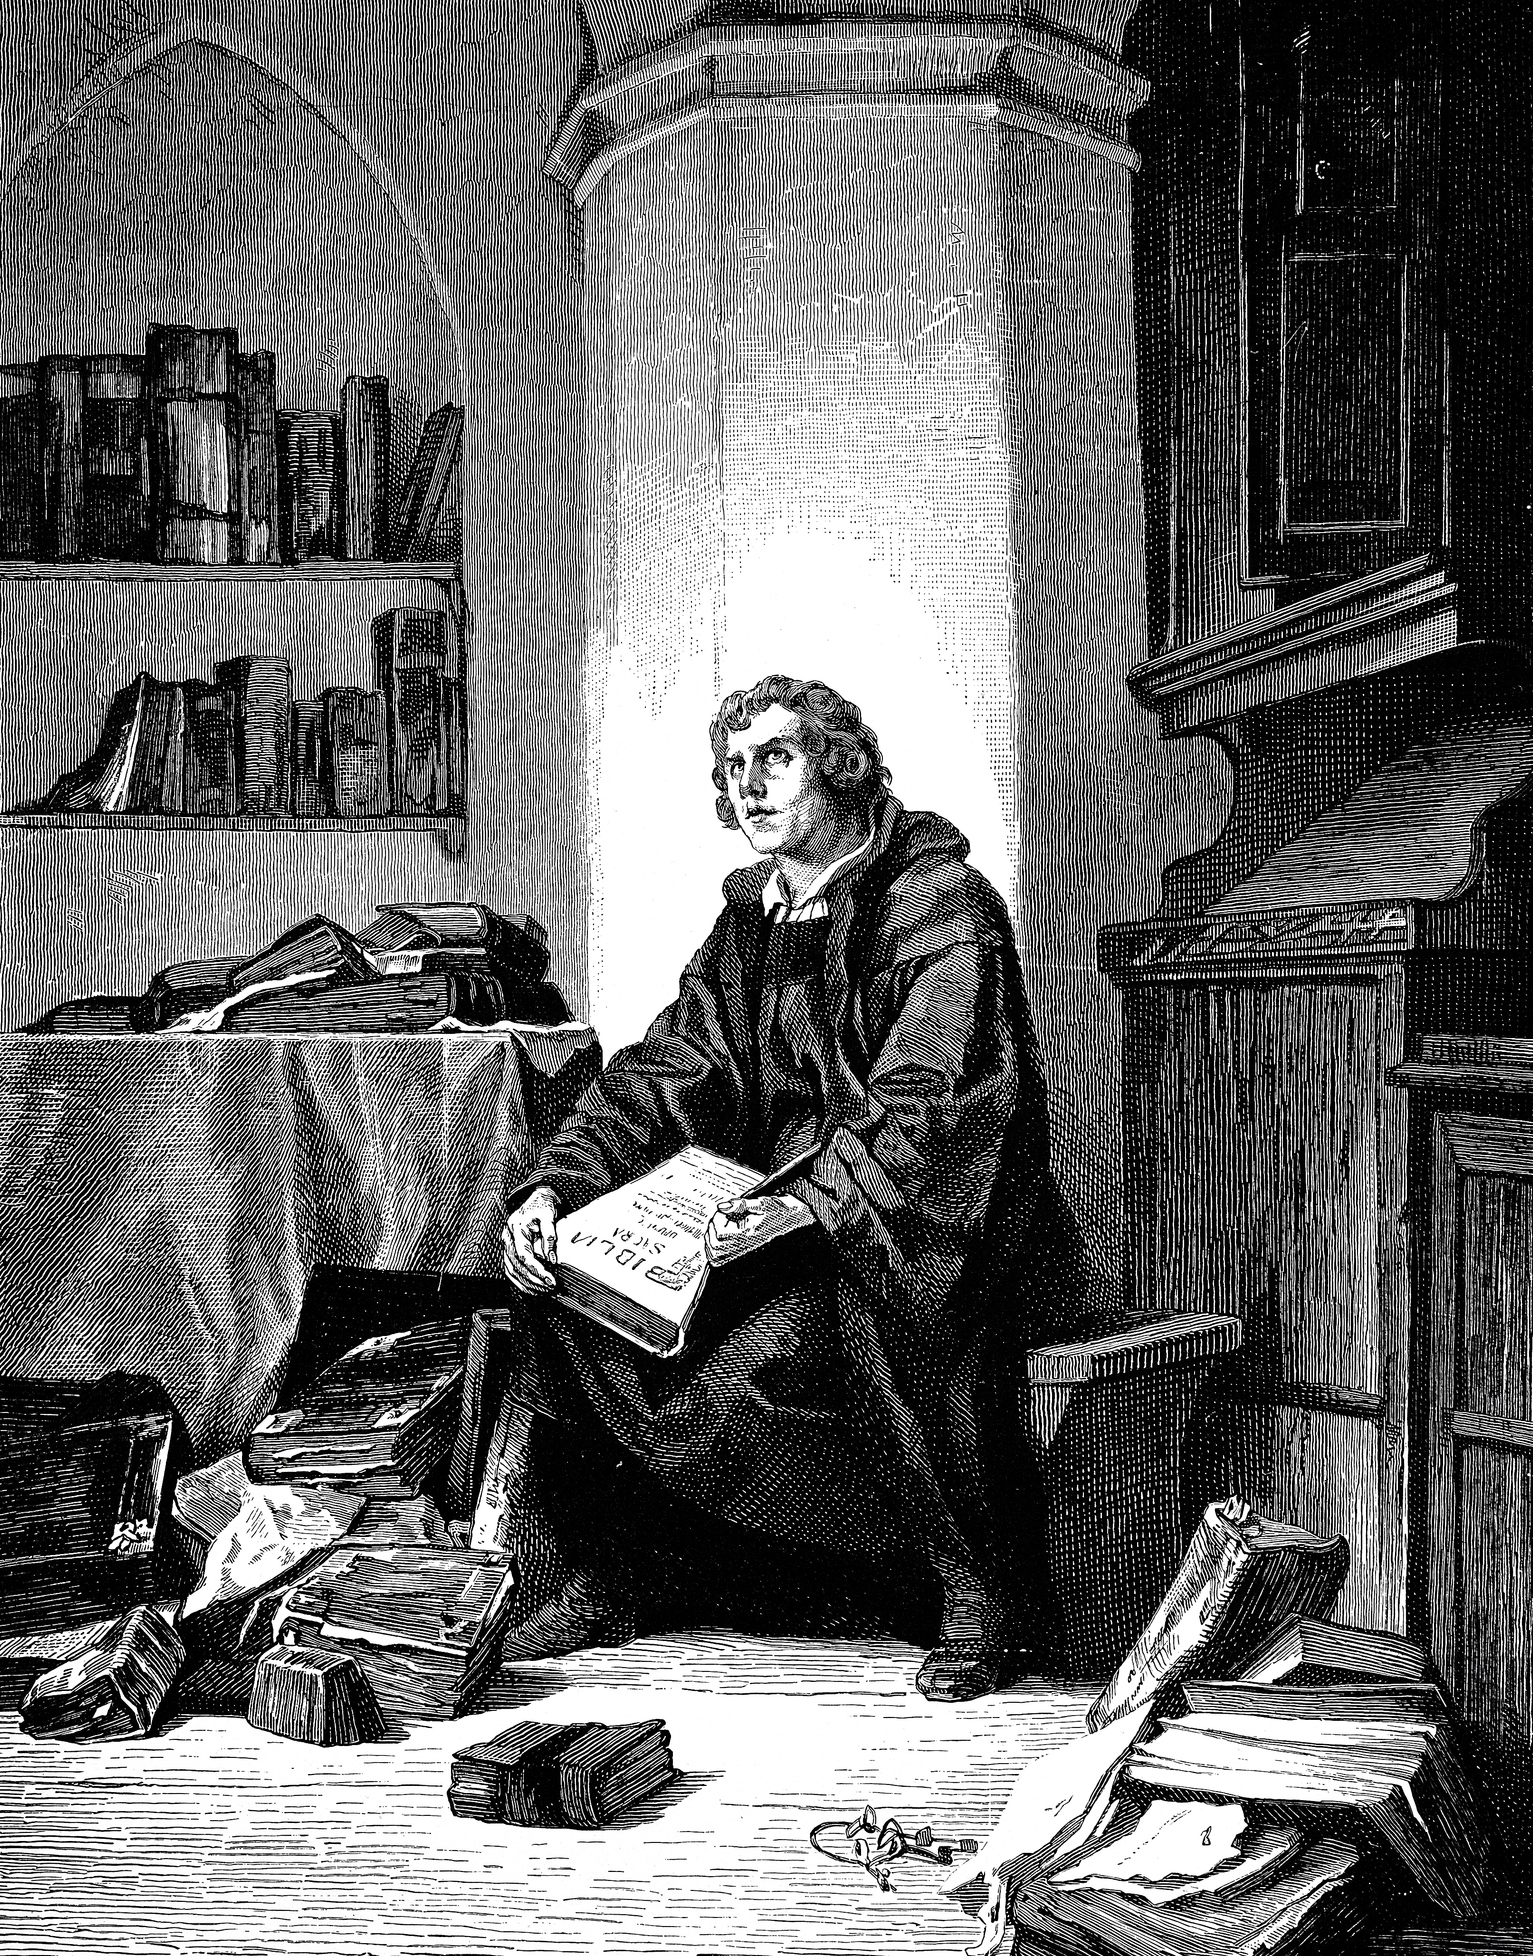 An illustration of Martin Luther in his library